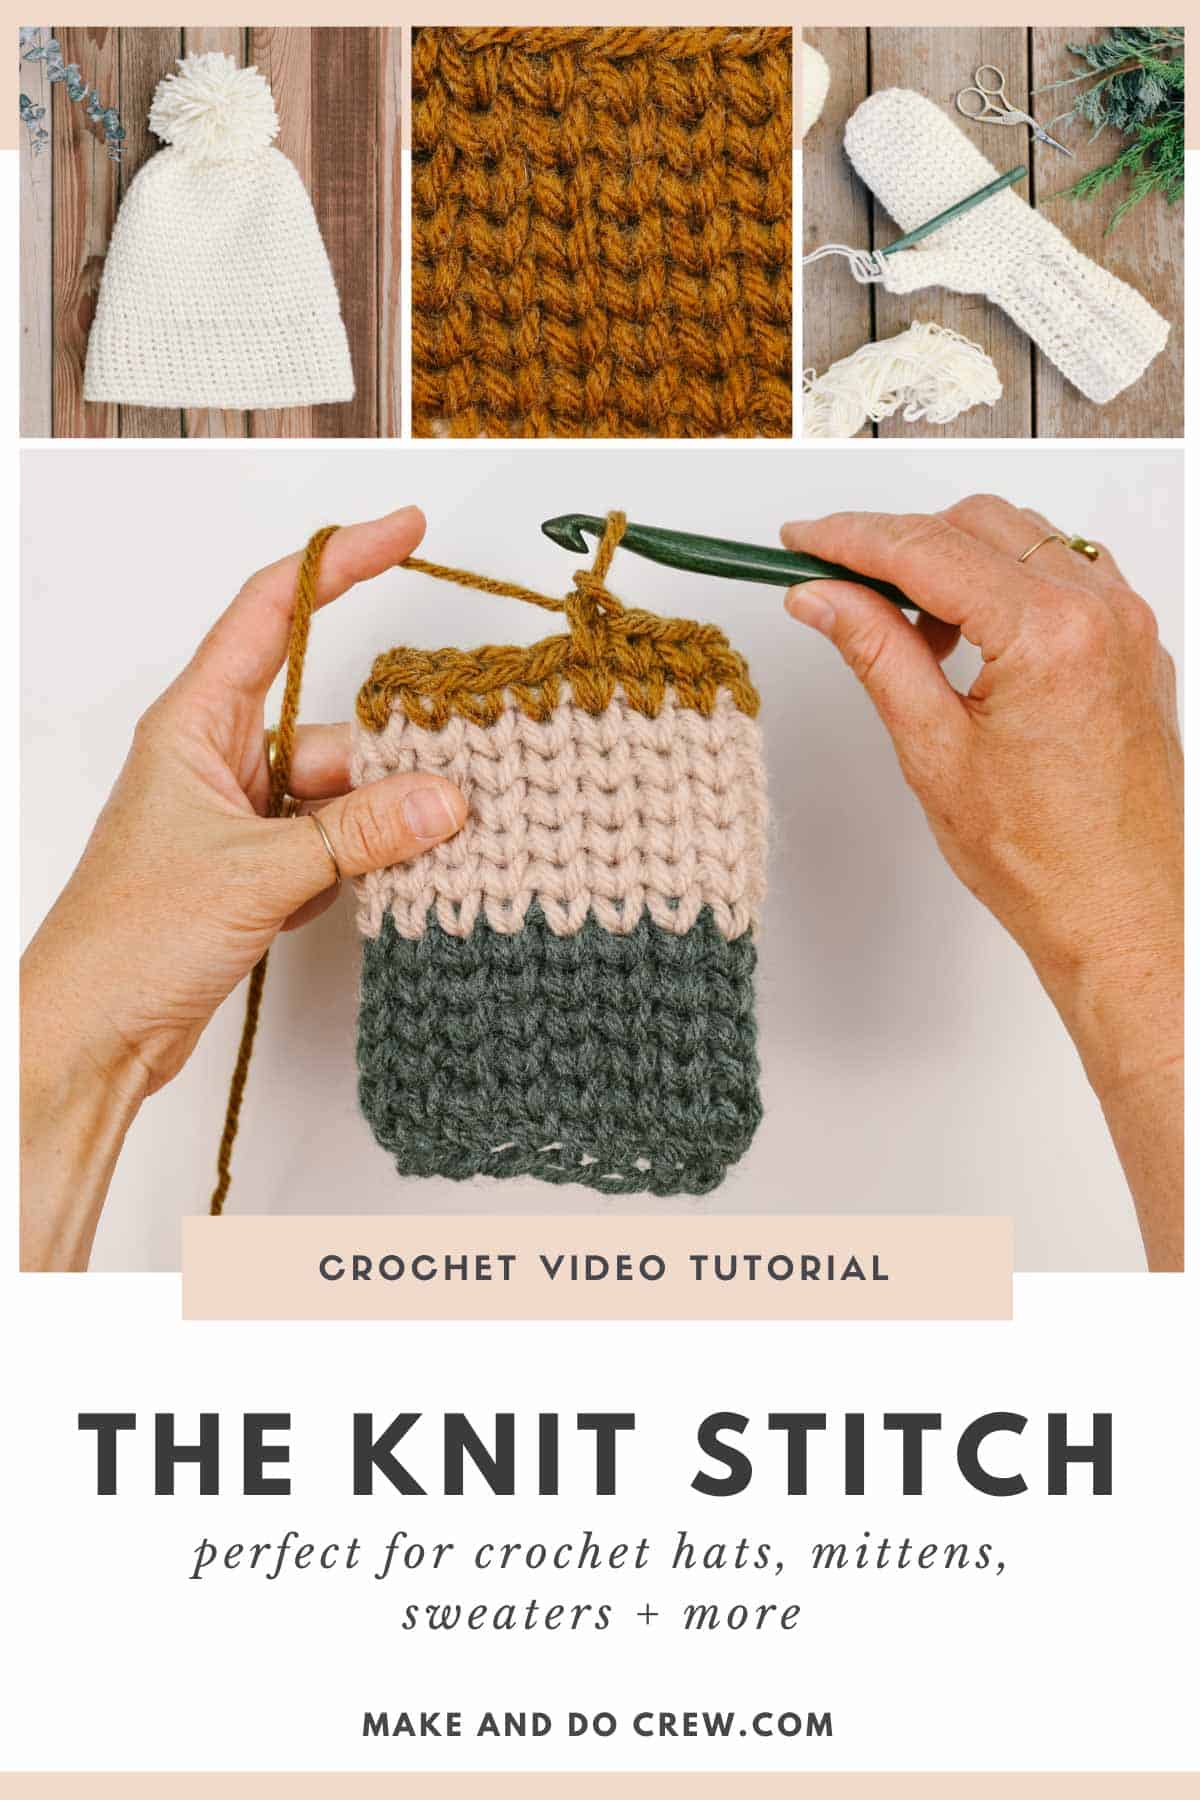 A grid of photos showing different examples of how to make crochet look like knitting using the crochet waistcoat stitch.